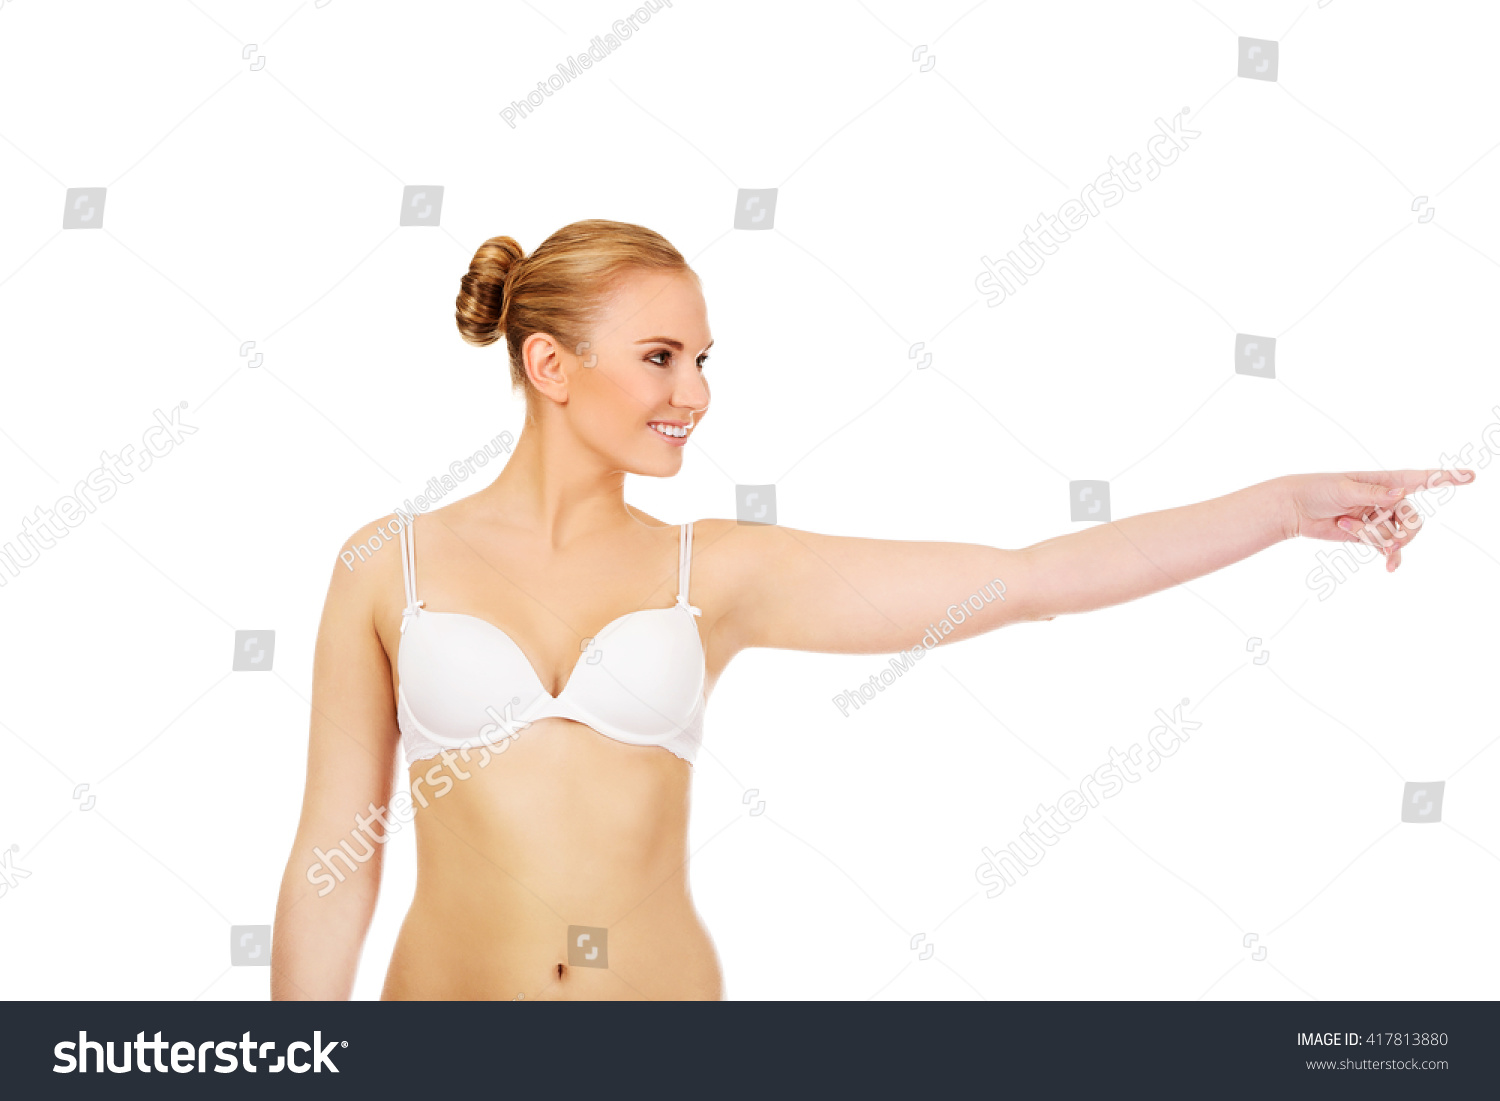 Young woman in white bra pointing for copyspace or something #417813880